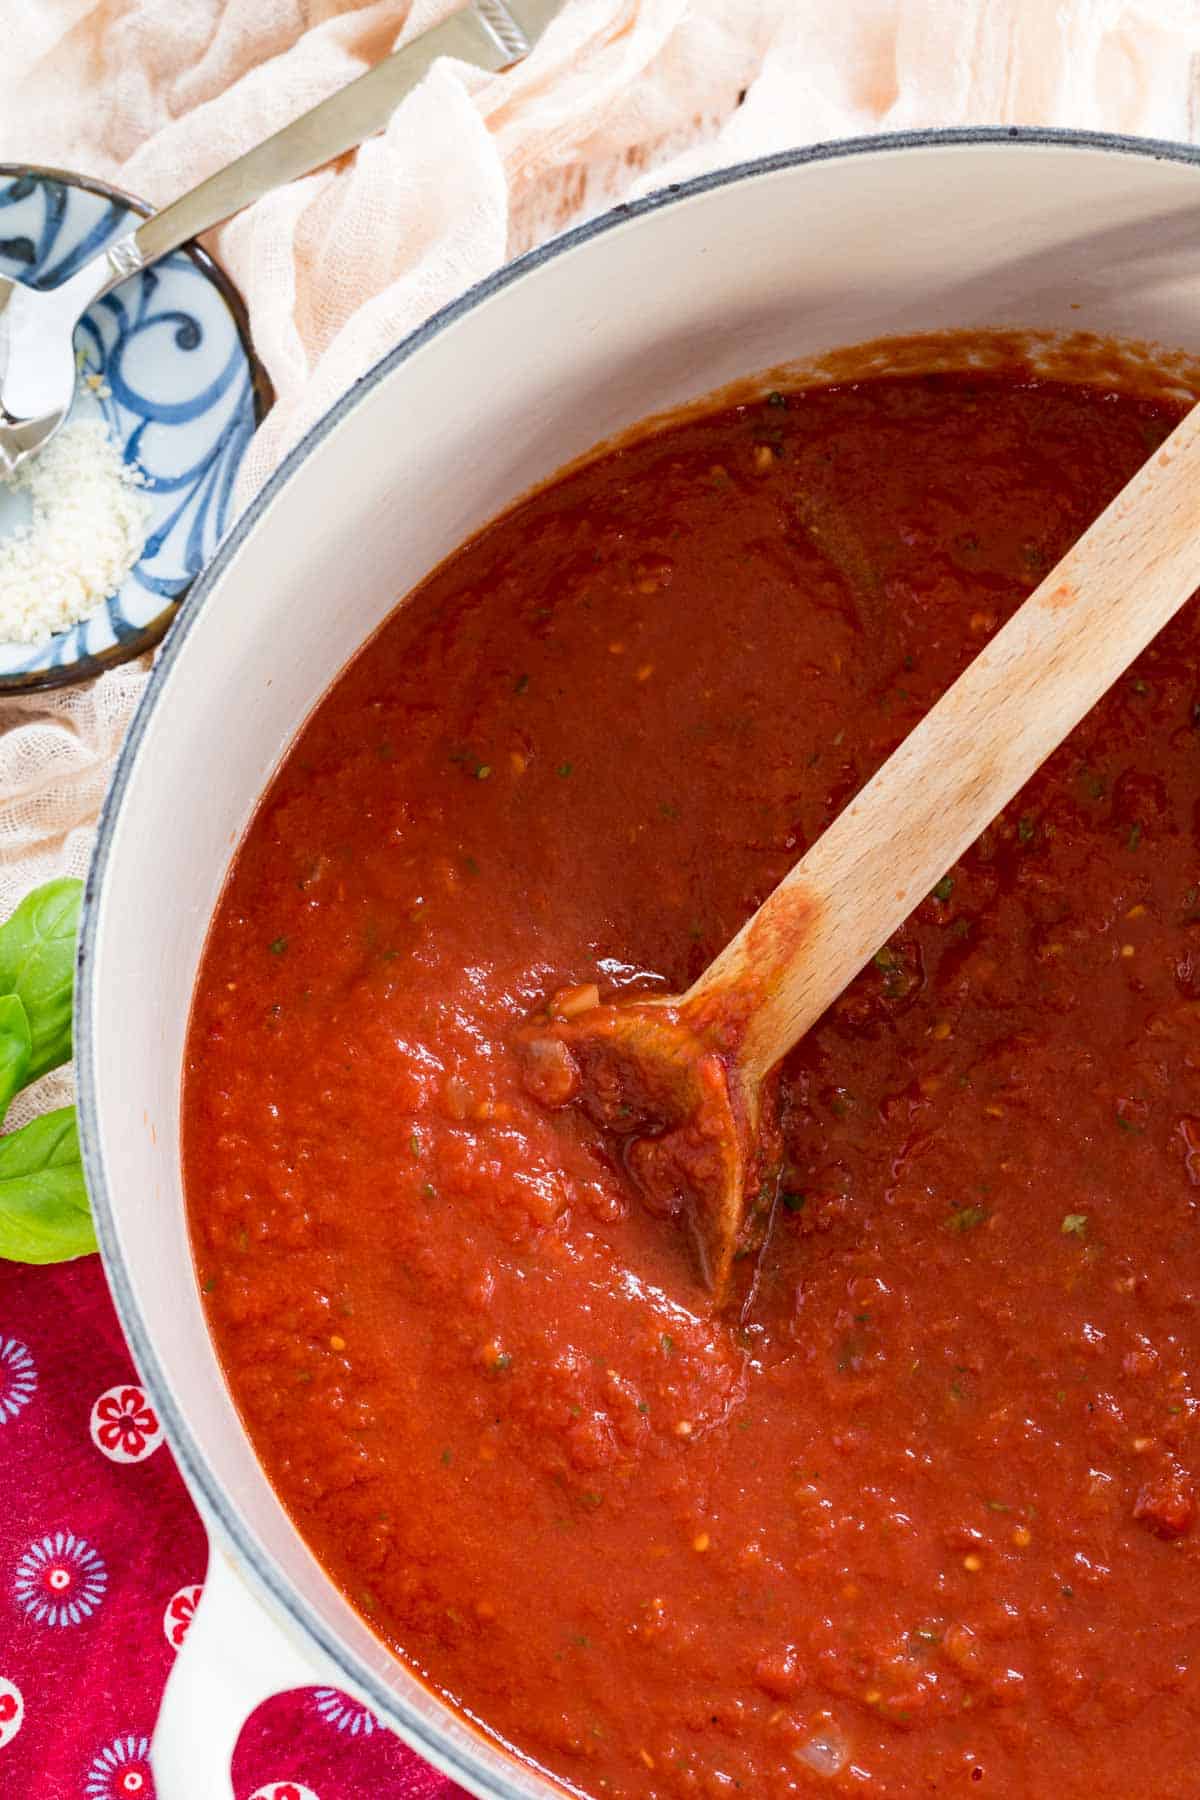 A wooden spoon is used to stir homemade marinara sauce.